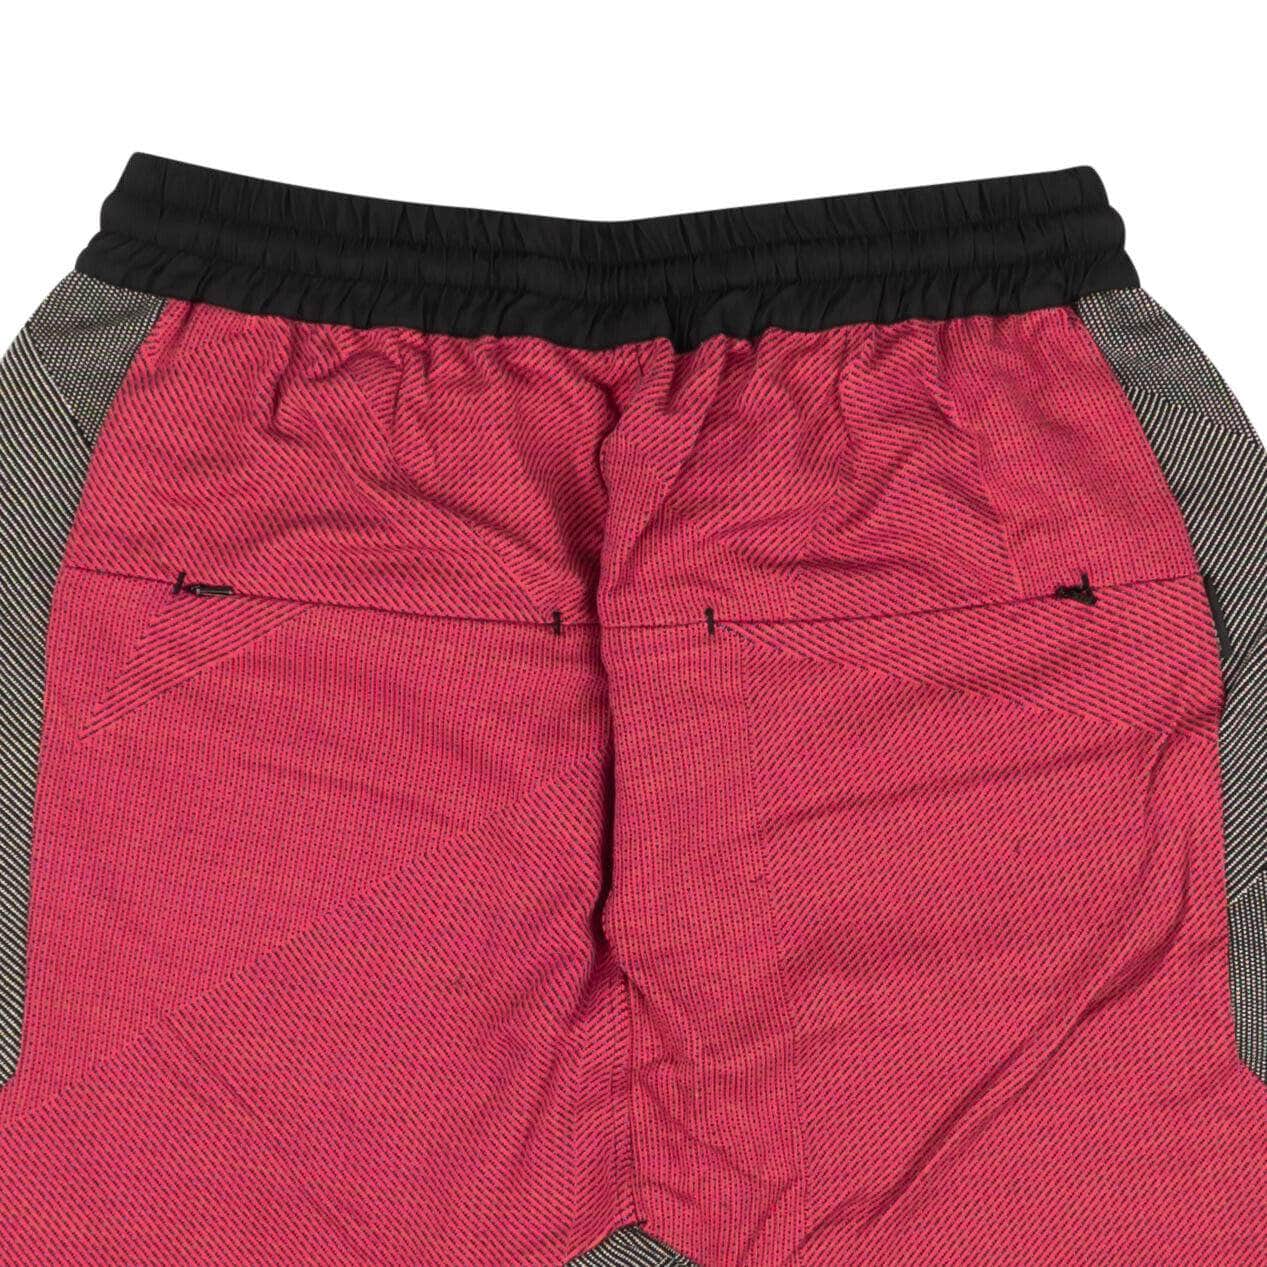 Byborre byborre, channelenable-all, chicmi, couponcollection, gender-mens, main-clothing, mens-shoes, MixedApparel, size-l, size-m, size-s, size-xl, under-250 Fuschia Woven B1 Shorts